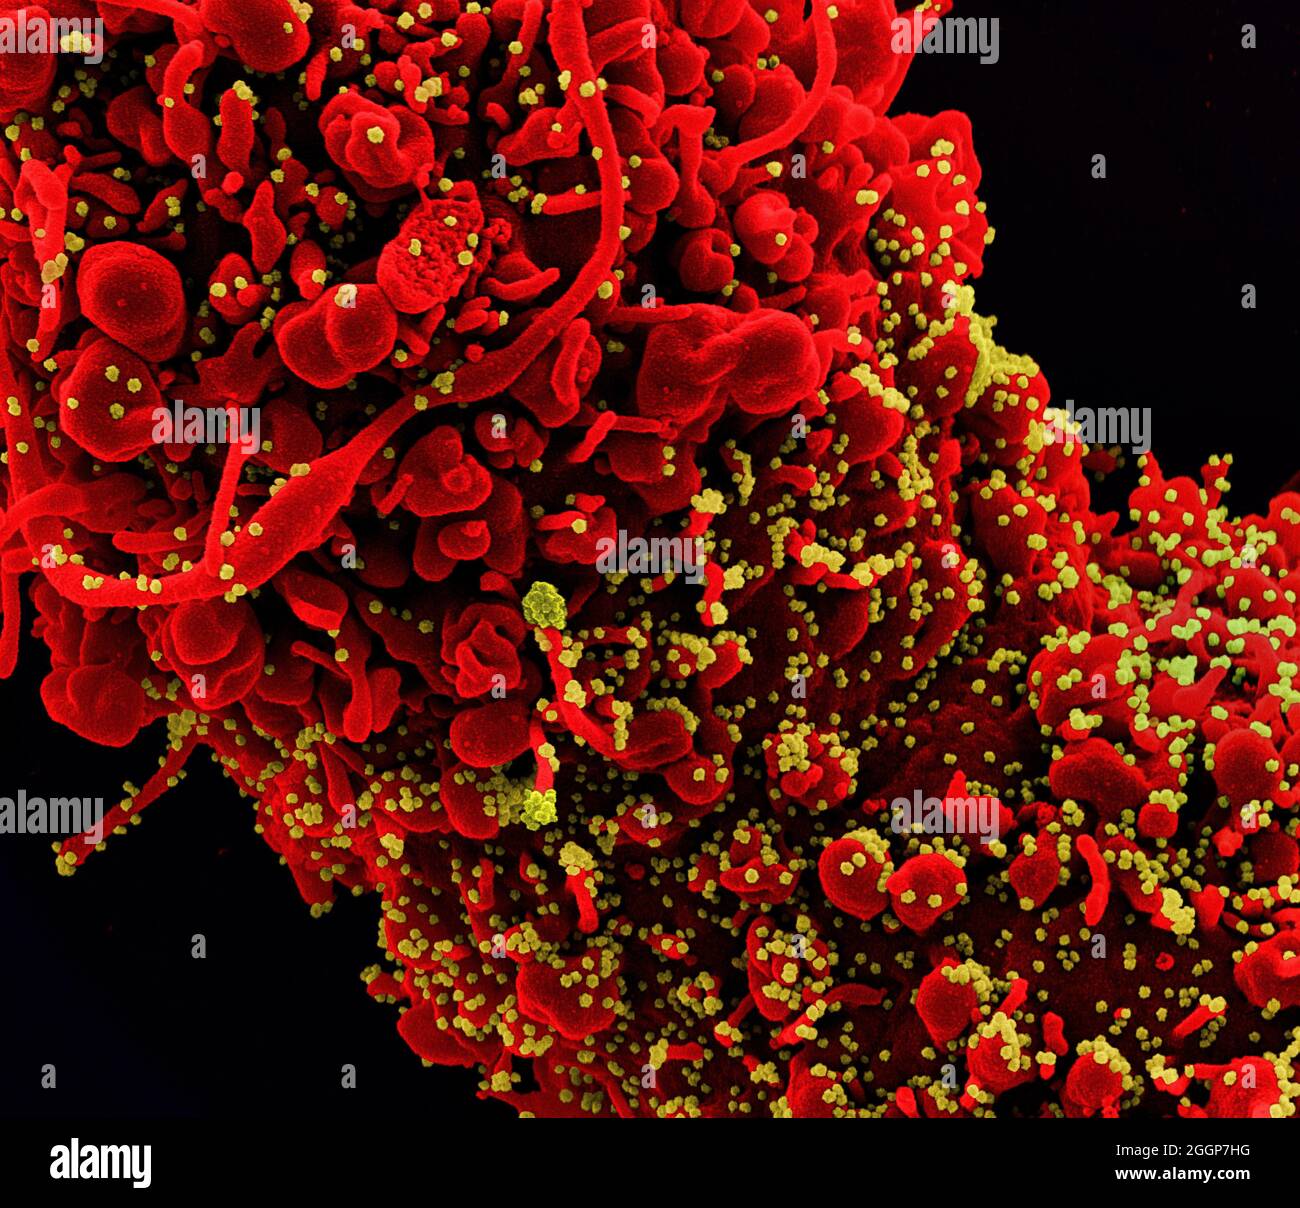 Colorized scanning electron micrograph of a cell (red) showing morphological signs of apoptosis, infected with SARS-COV-2 virus particles (yellow), isolated from a patient sample. Stock Photo